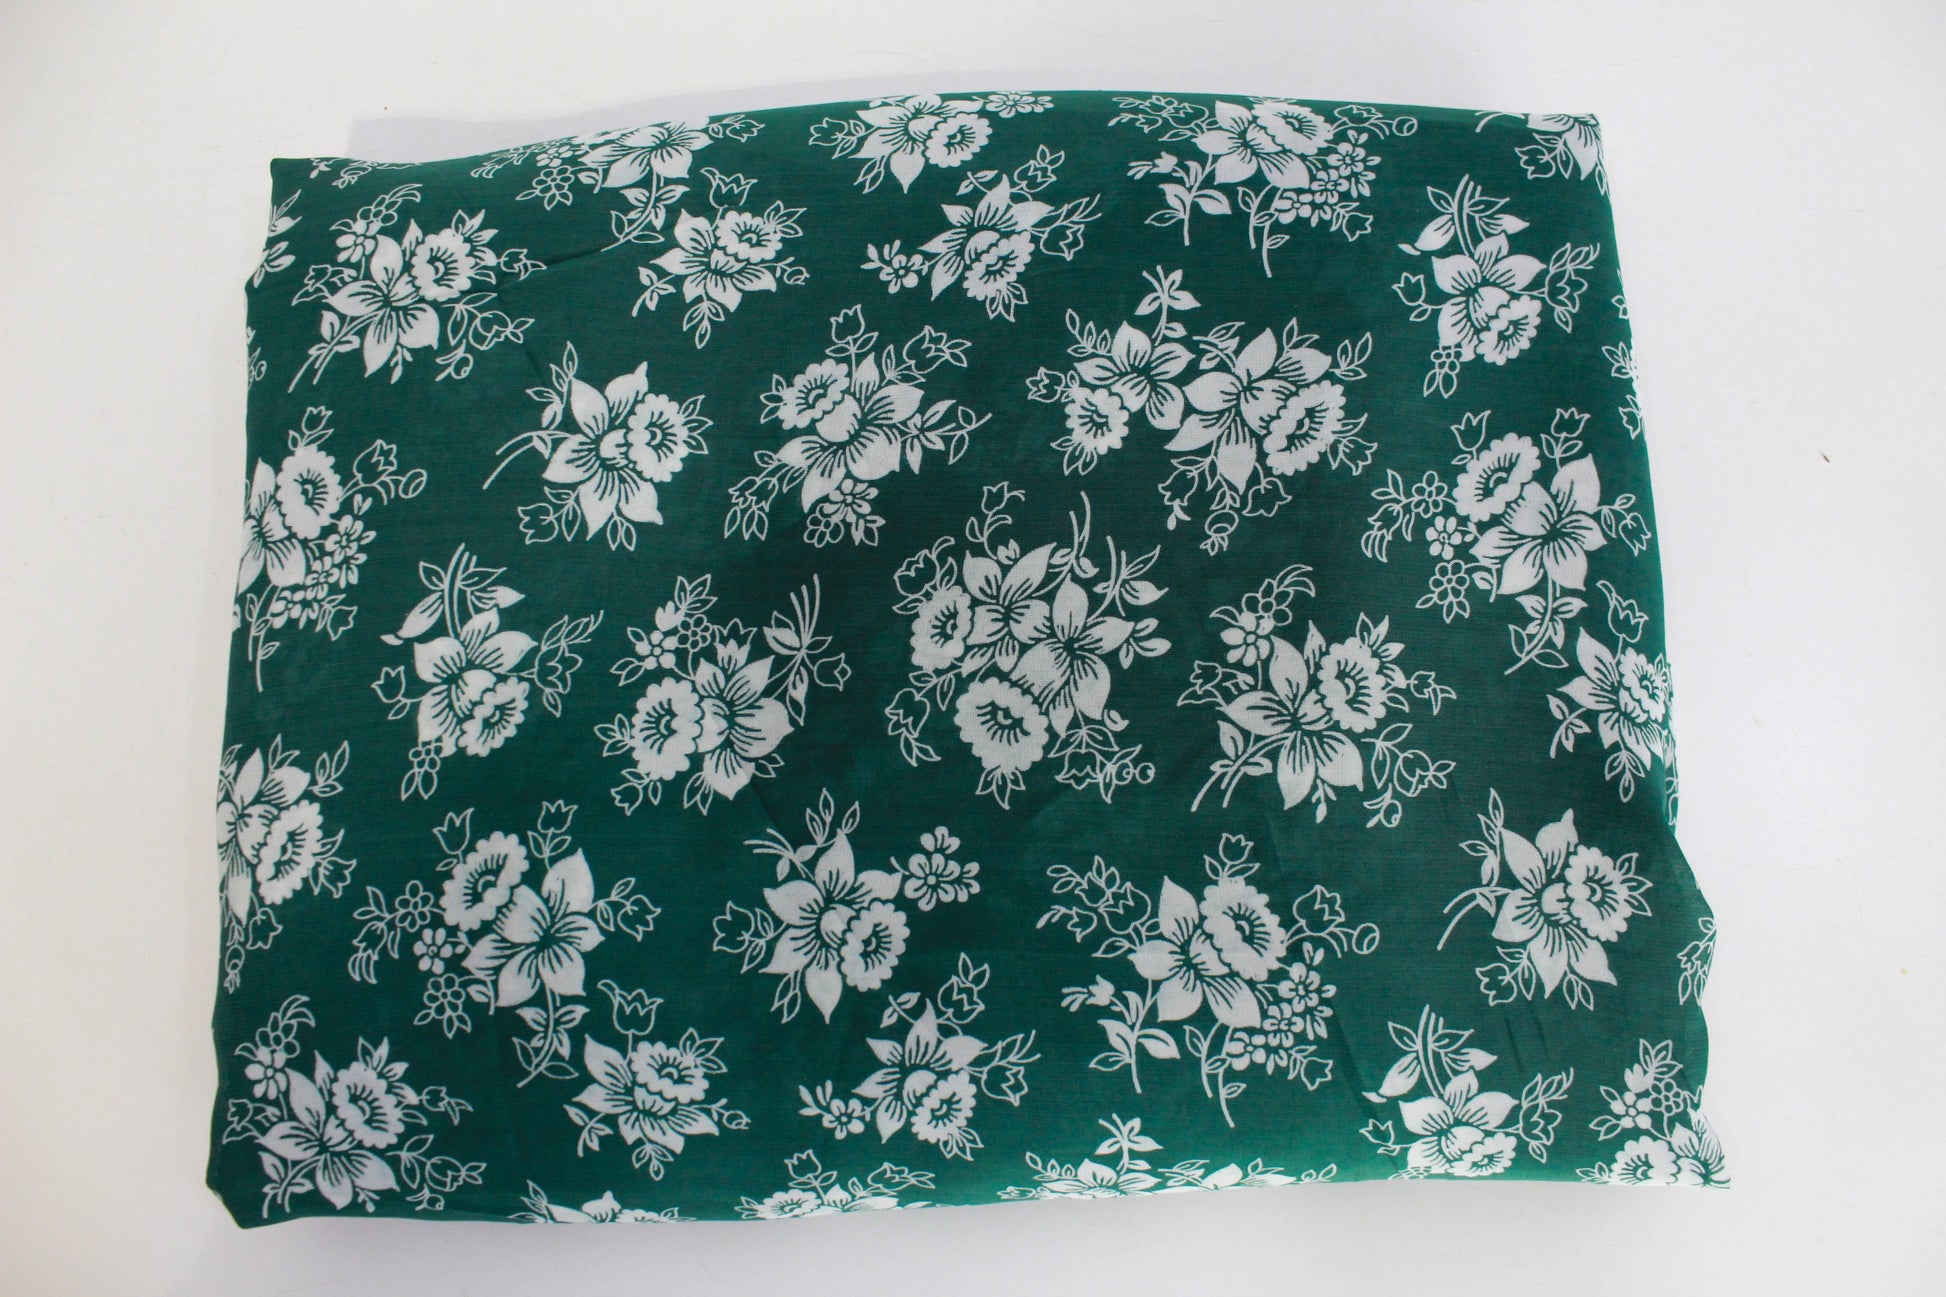 1940s green floral print nylon sewing fabric 6.5 yards vintage sewing